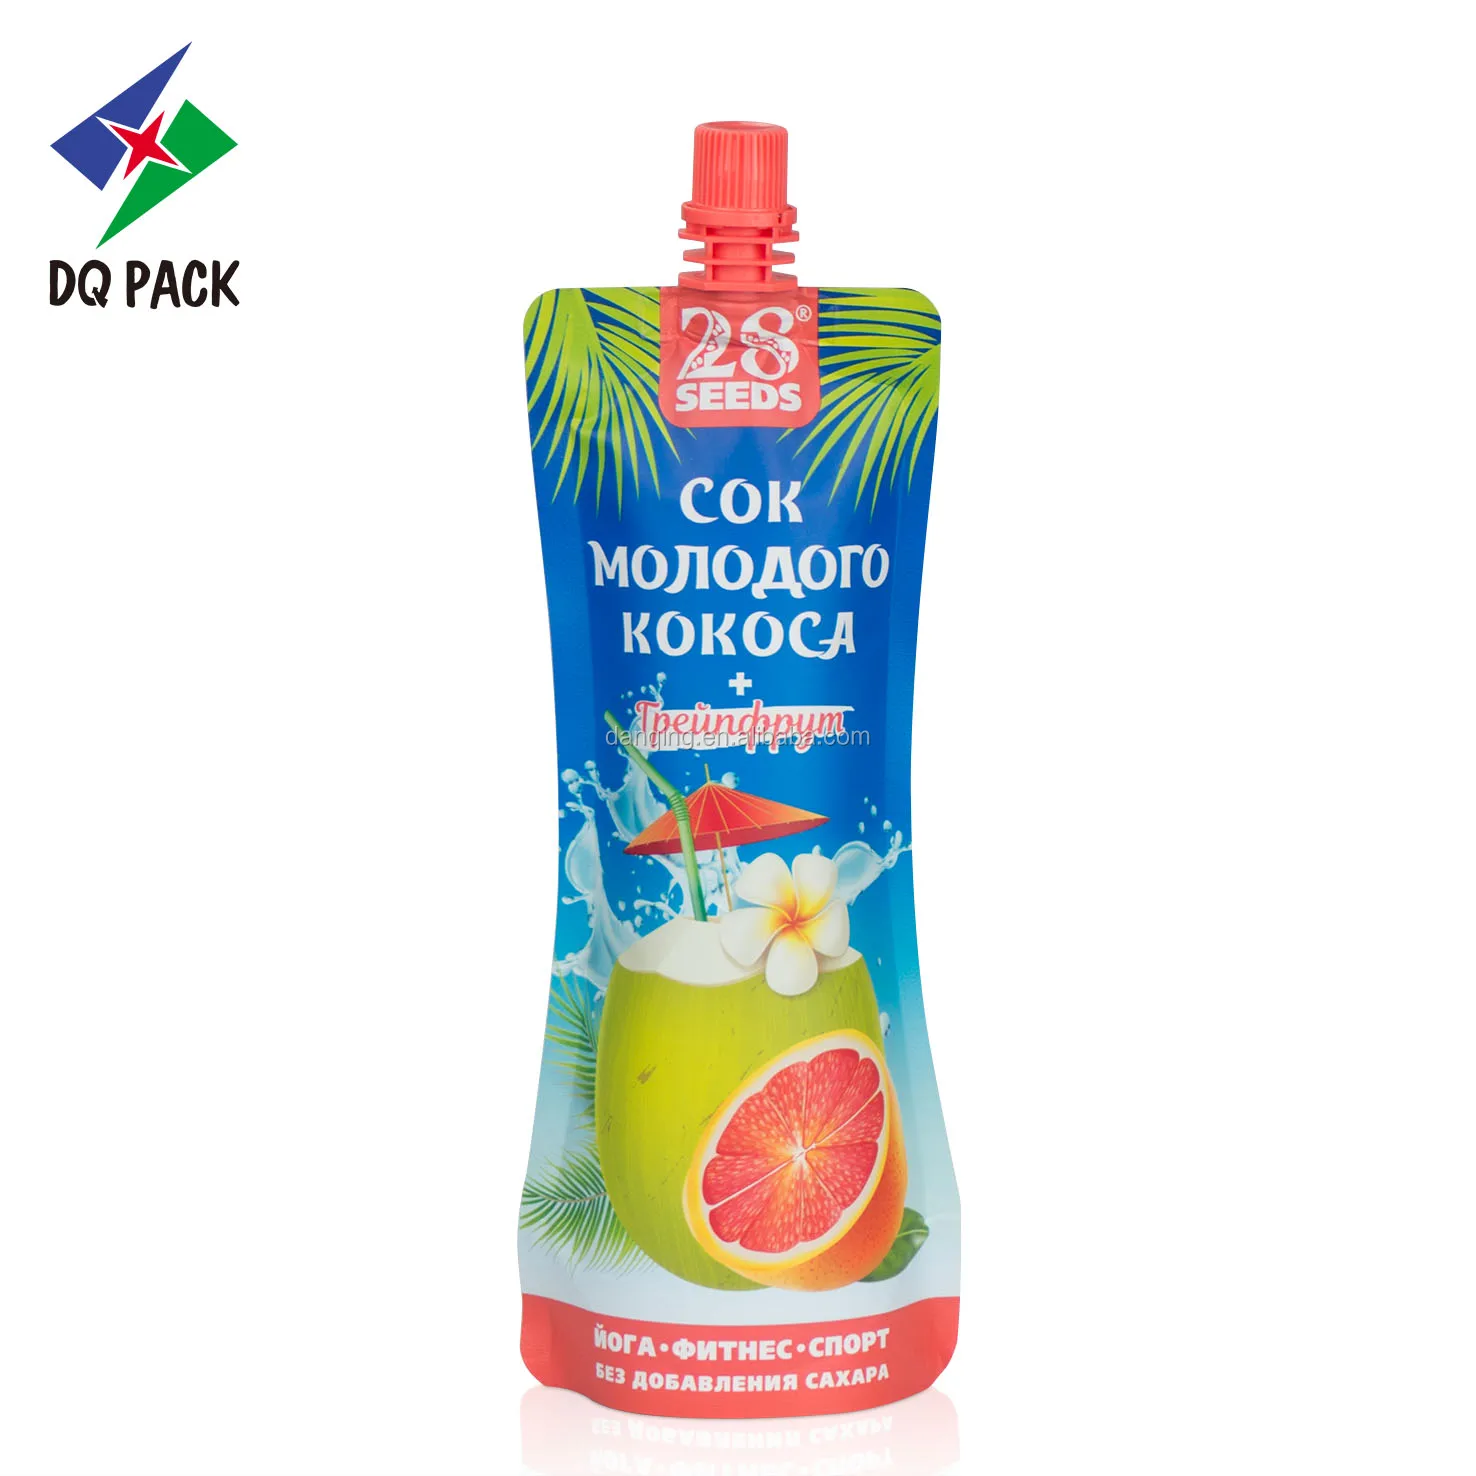 DQ PACK clothes washing liquid stand up pouches